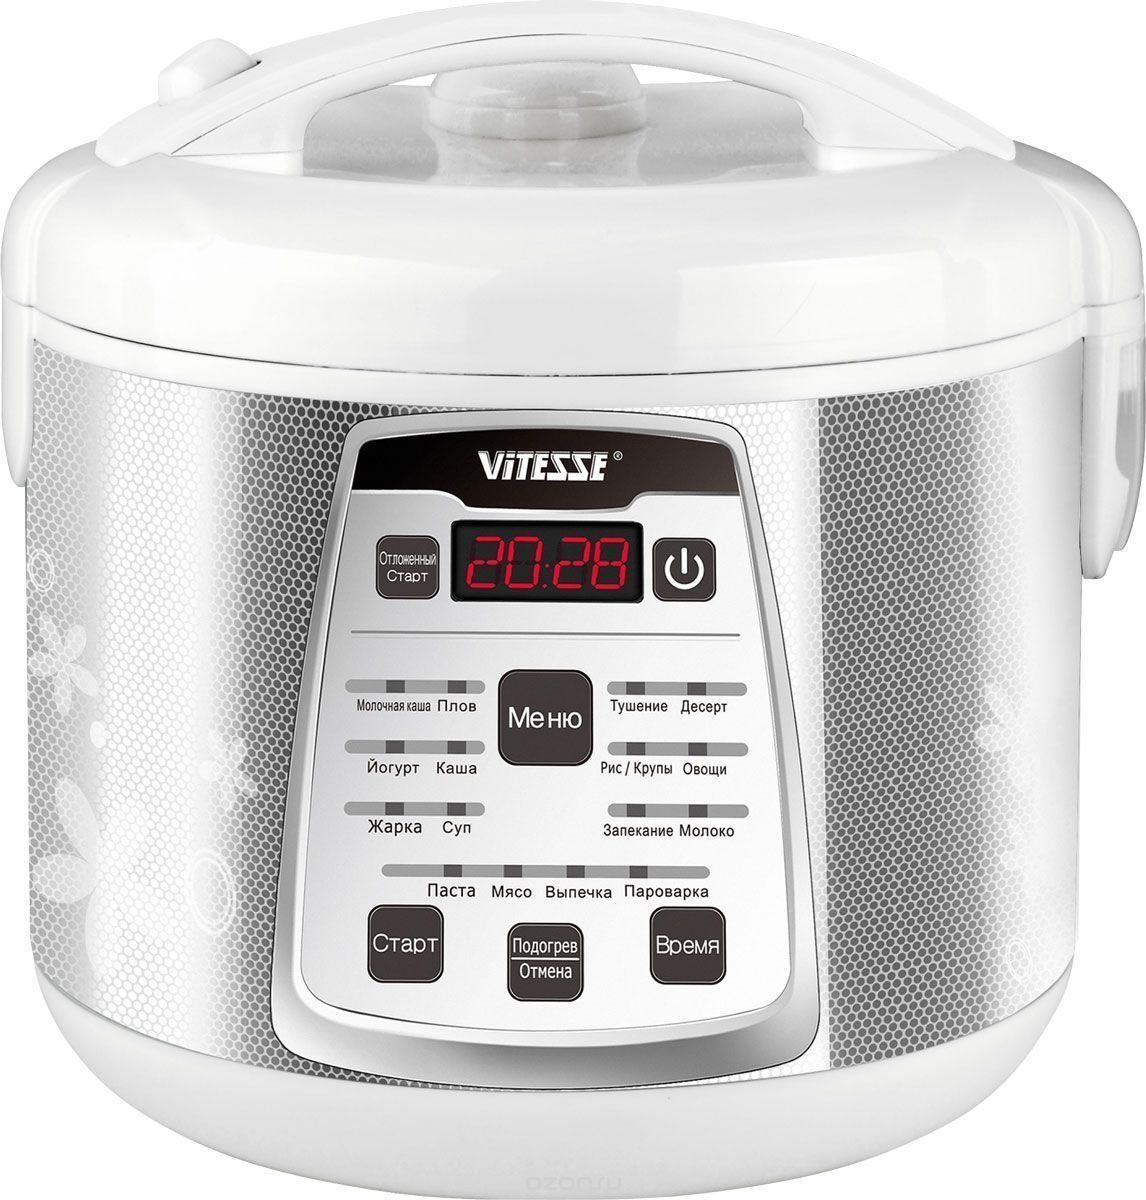 Review of the best multicooker Vitesse and their capabilities